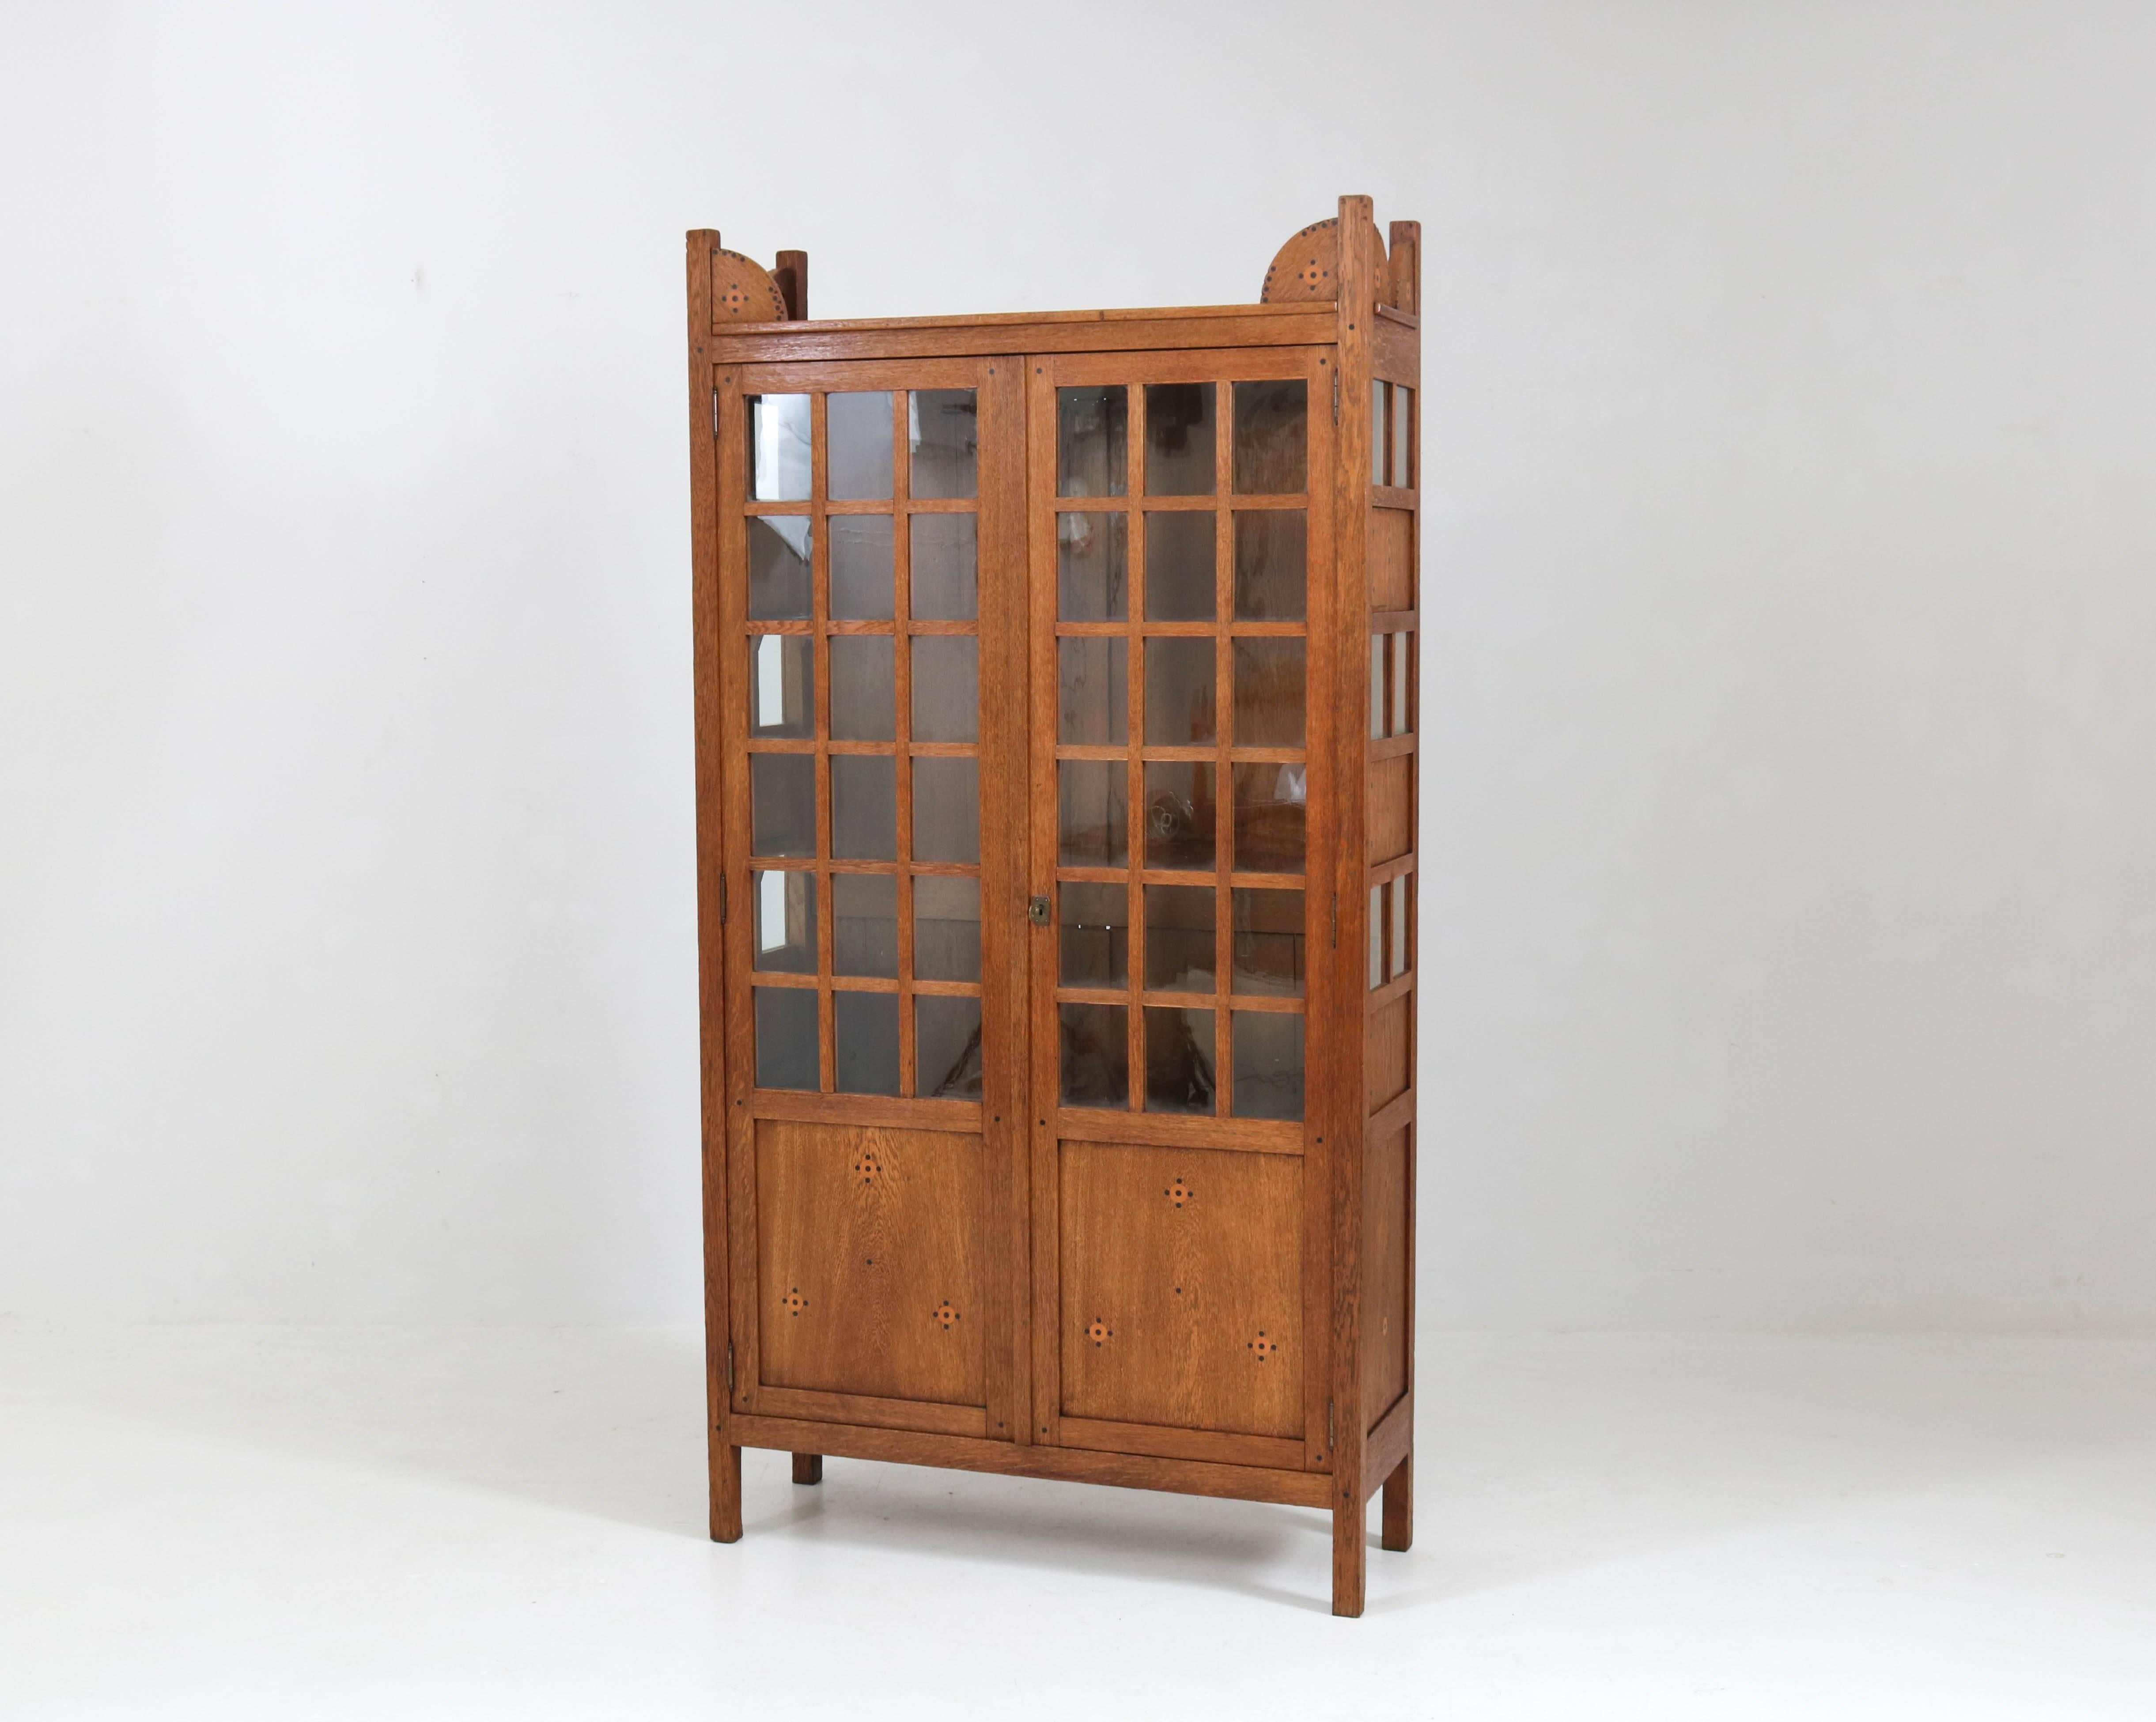 Offered by Amsterdam Modernism:
Rare and hard to find Art Nouveau Nieuwe Kunst bookcase by Jac van den Bosch.
Striking Dutch design from the 1900s.
Solid oak with original inlay and glass.
This elegant bookcase is not marked with tag 't Binnenhuis